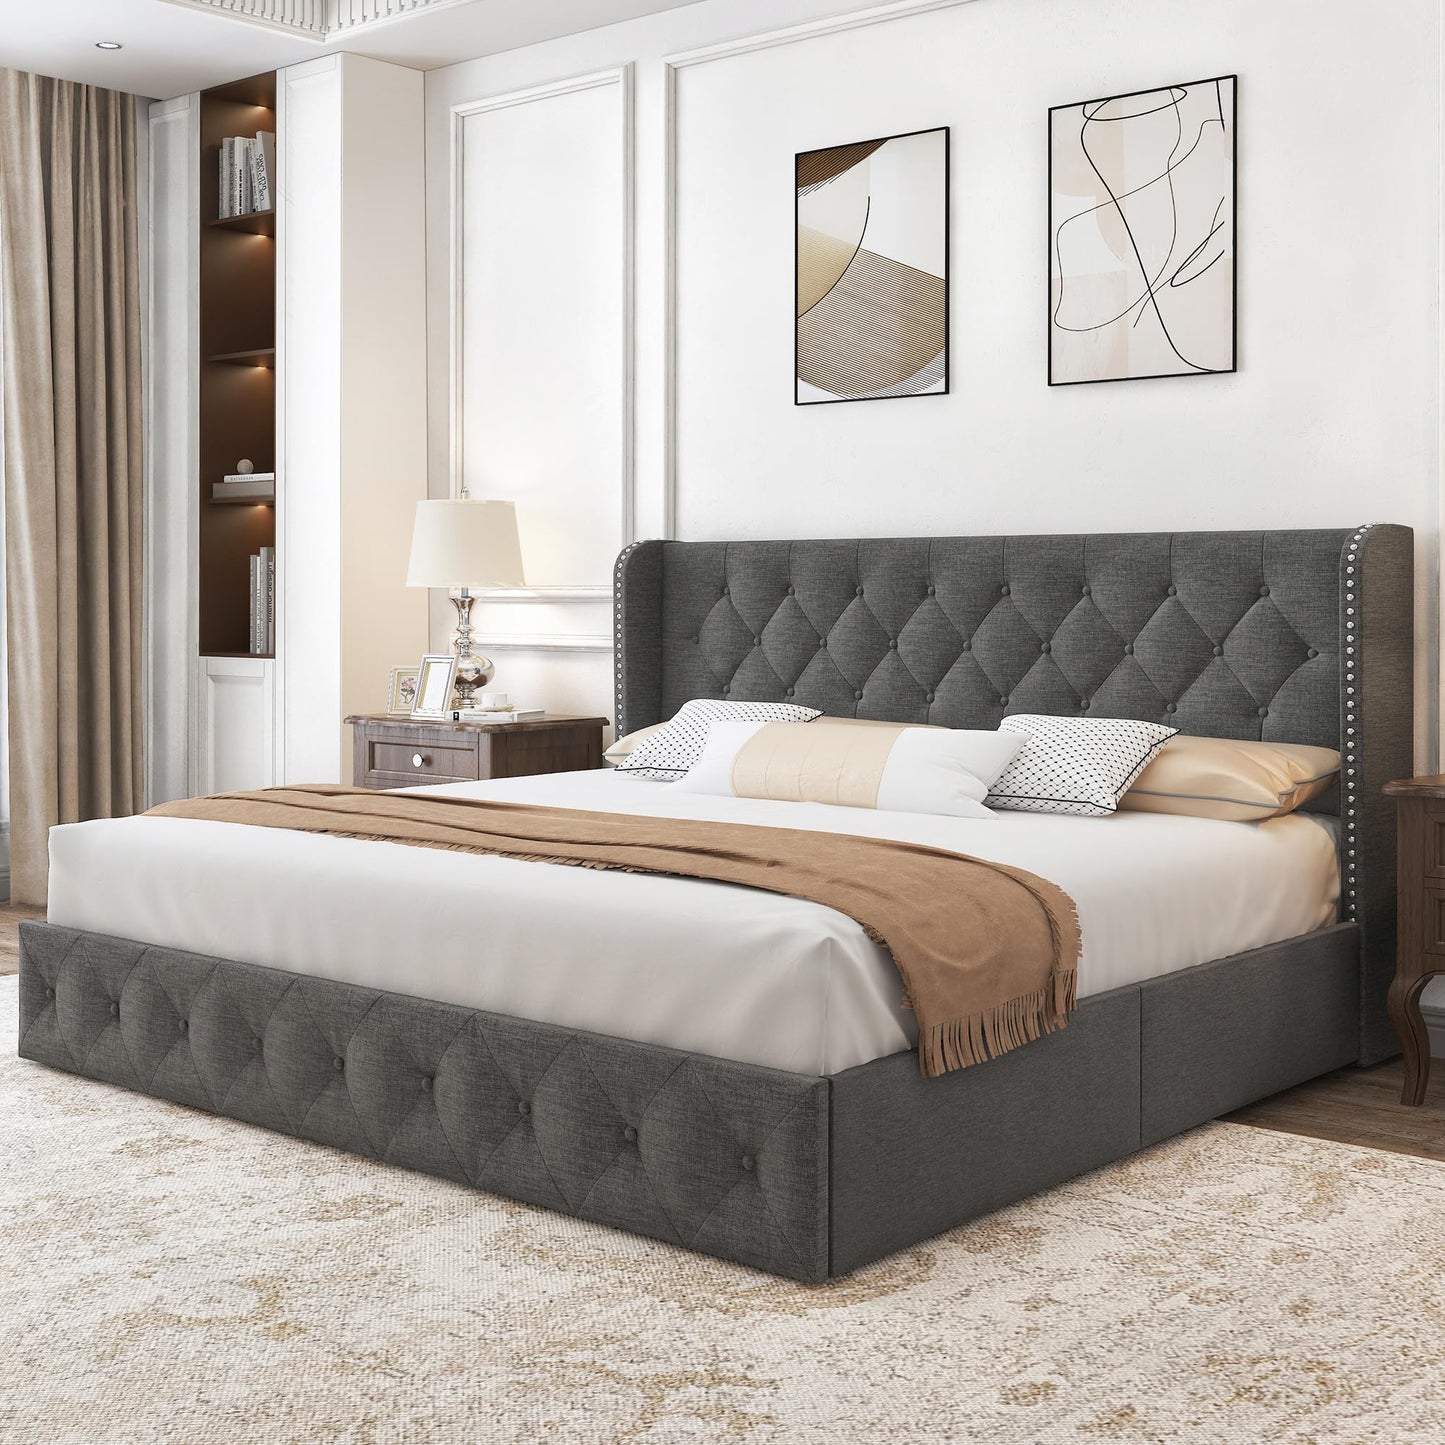 BRELTAM King Size Bed Frame with 4 Storage Drawers and Wingback Headboard, Linen Upholstered Platform Bed Tufted Bed Frame with Solid Wood Slats